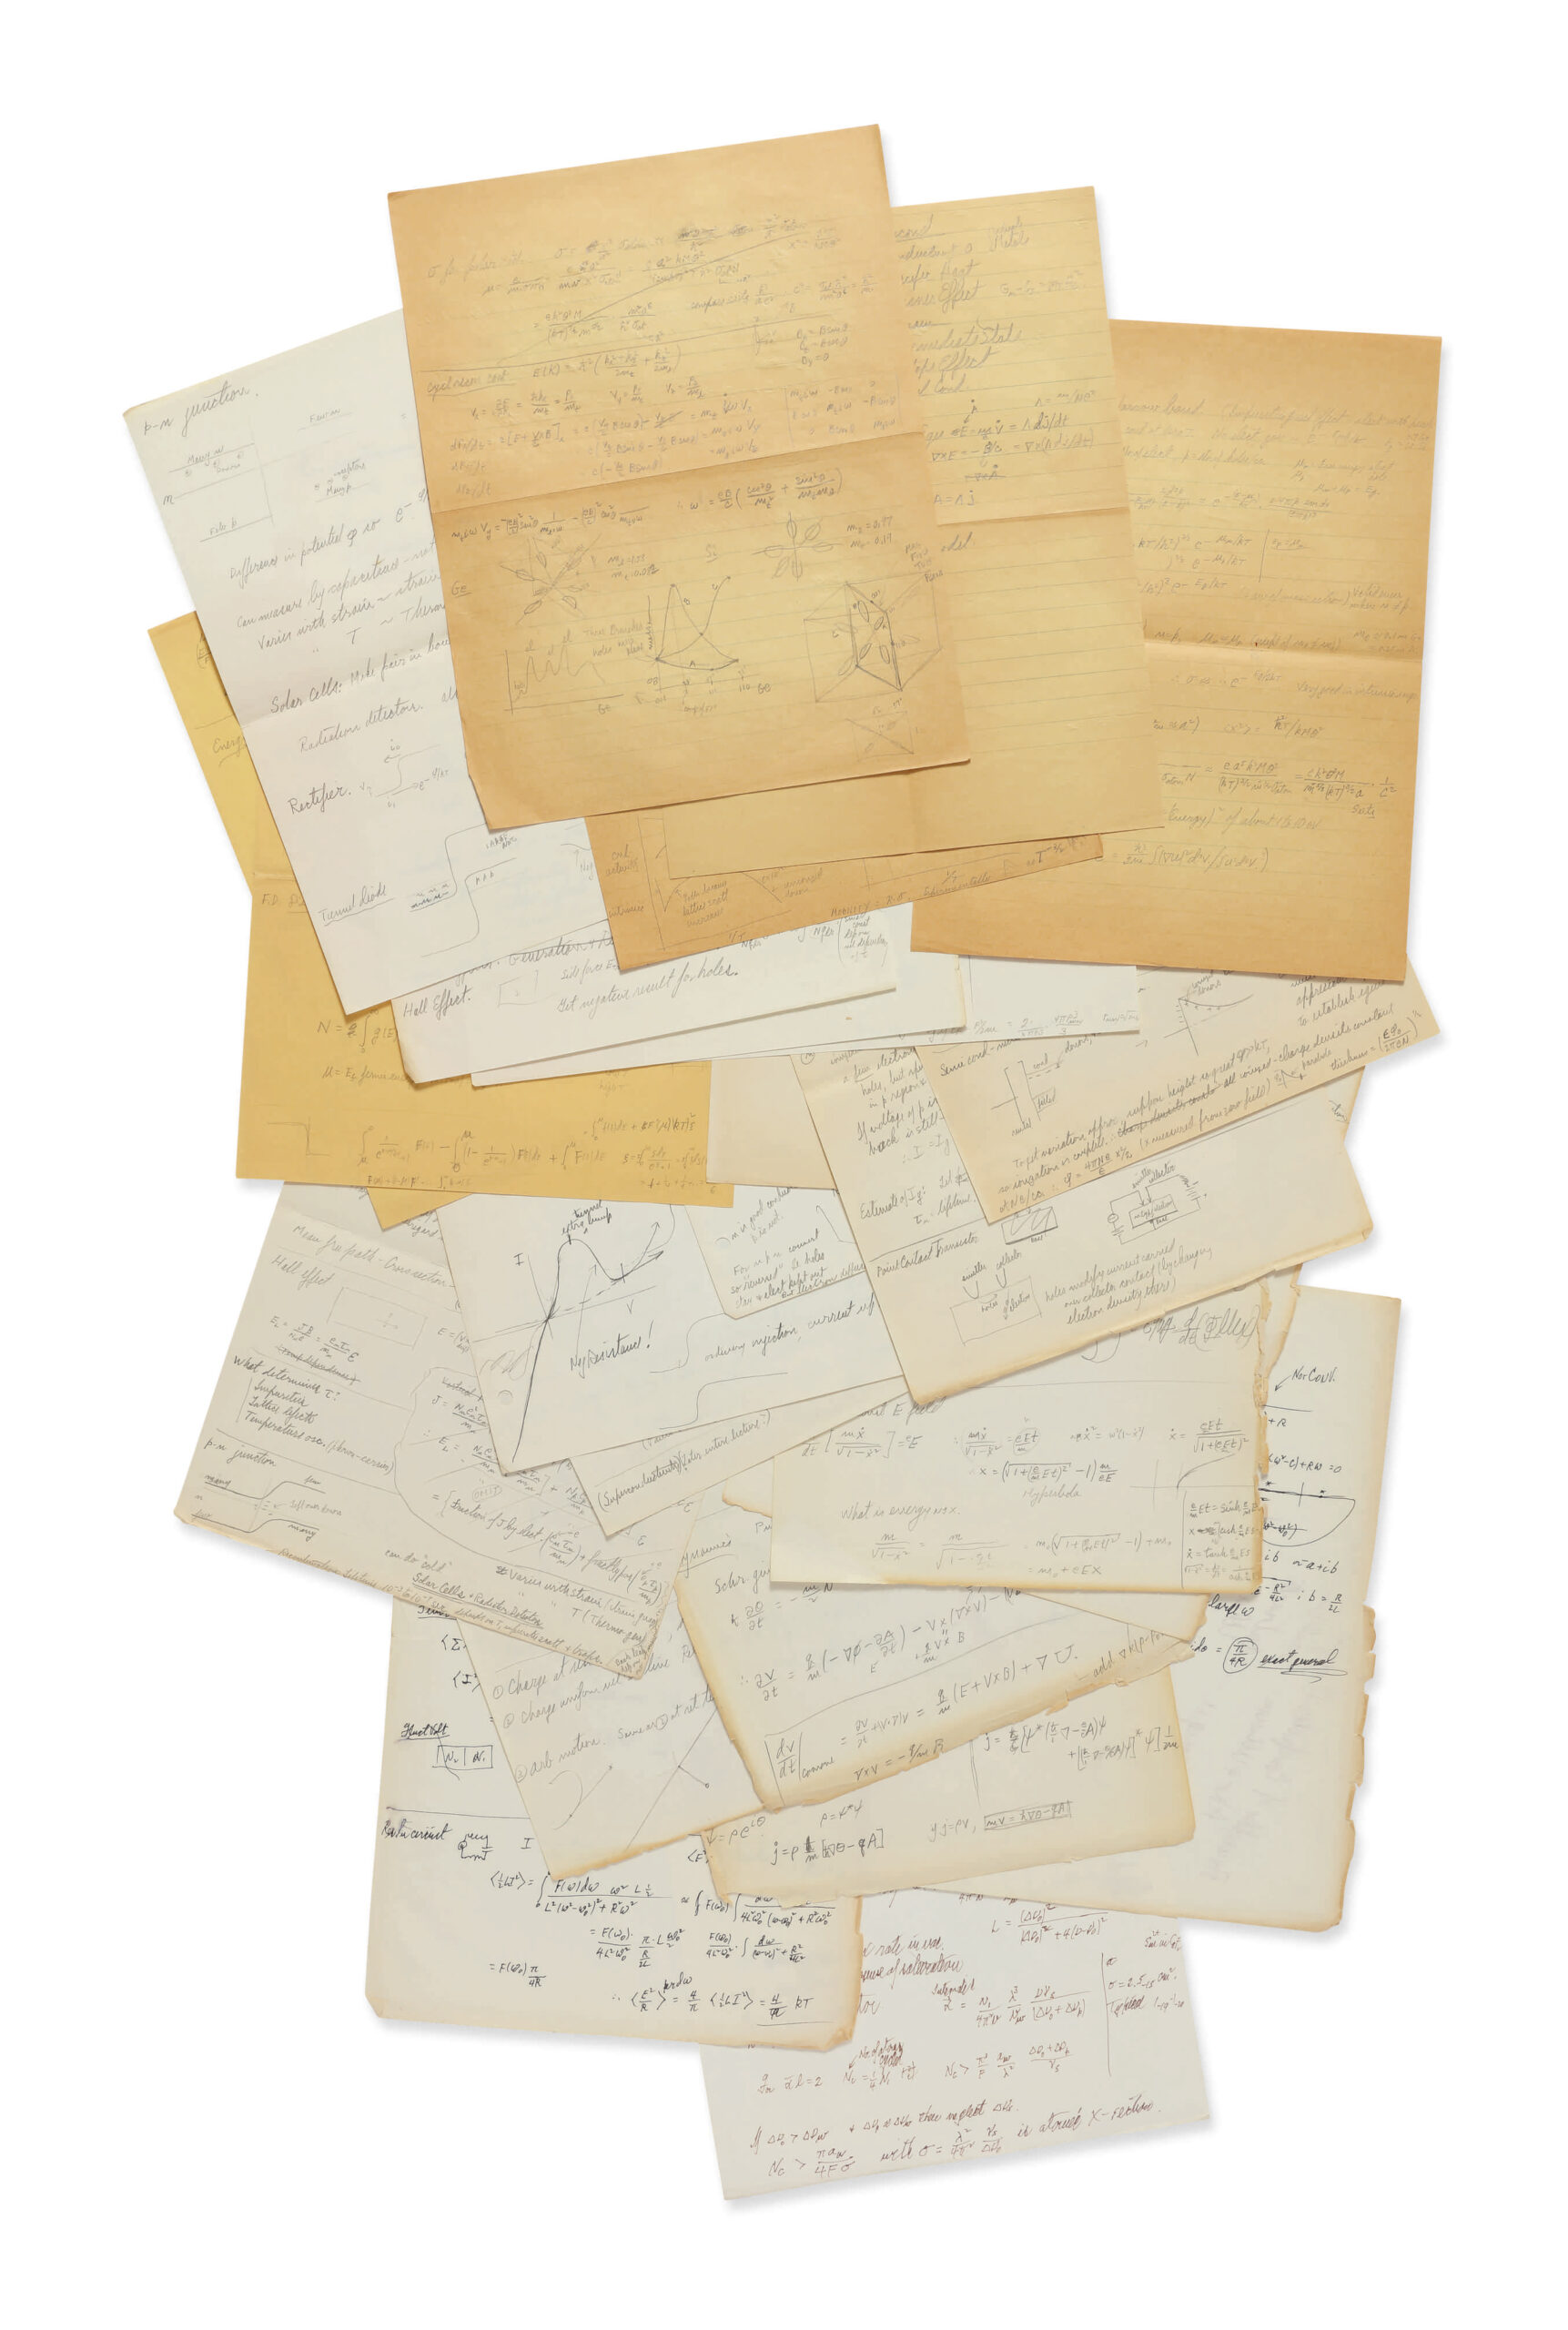 Feynman papers auction Sotheby's